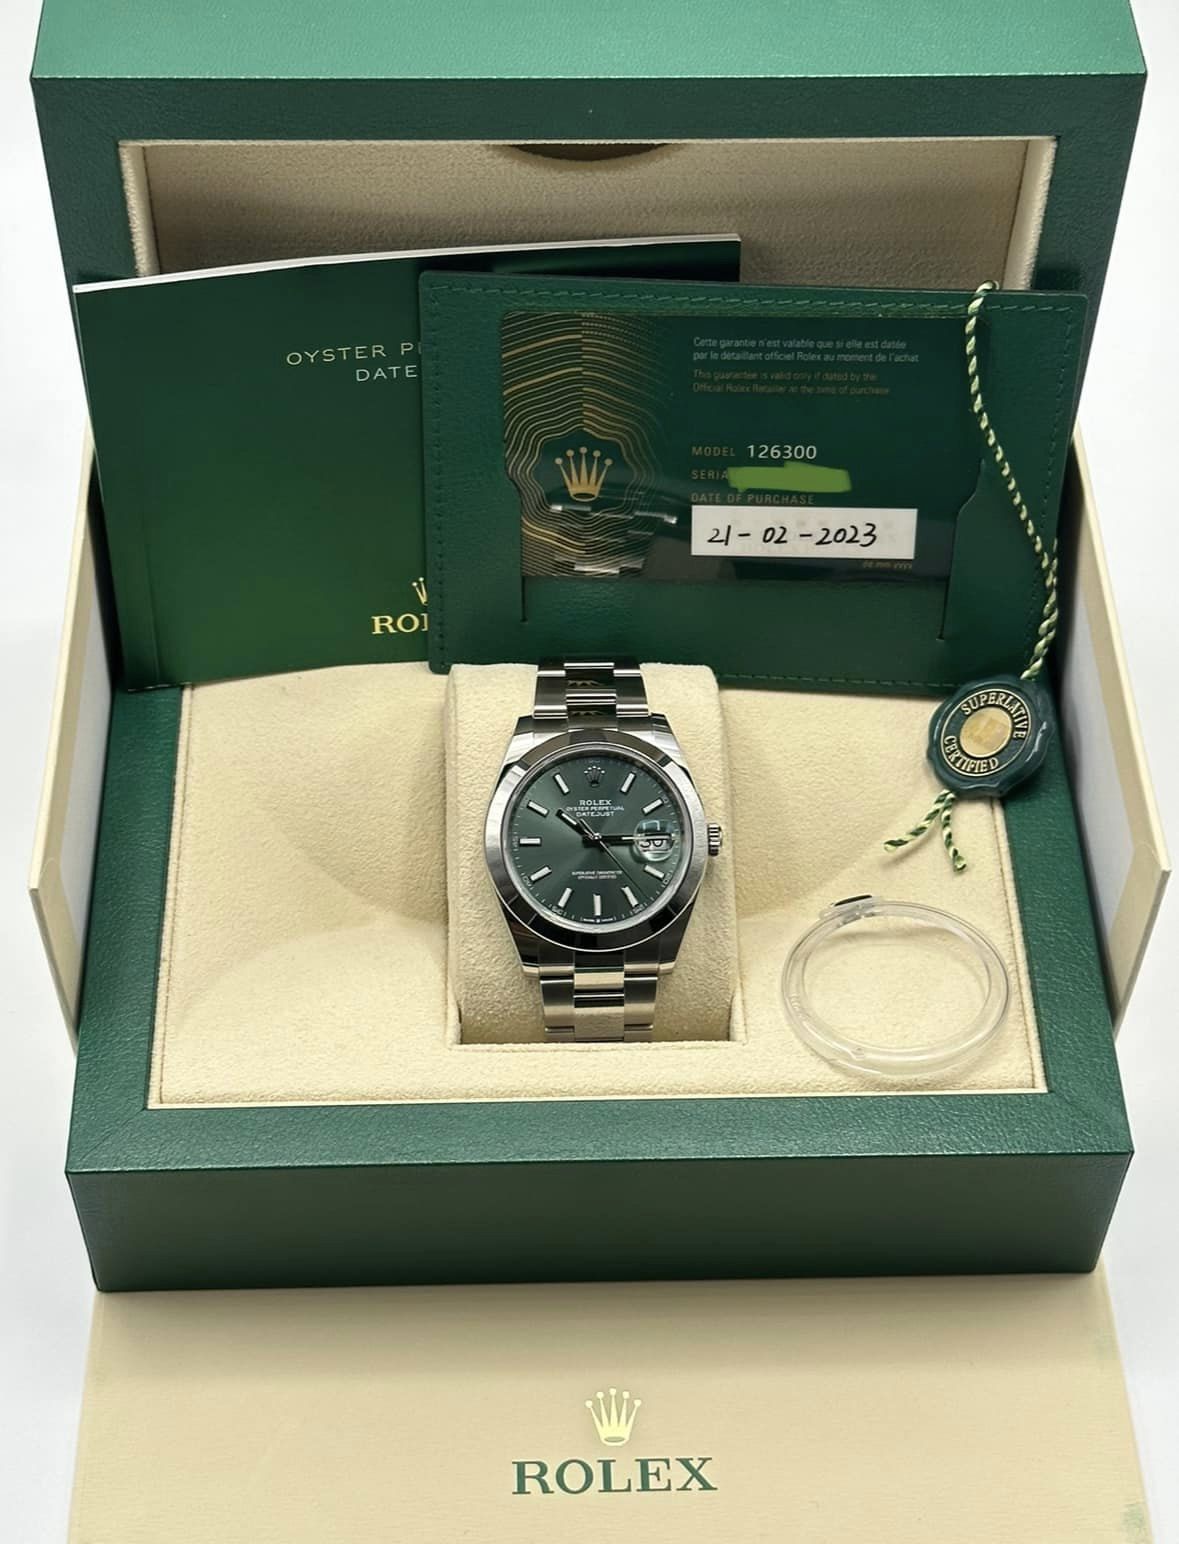 New 2023 Rolex Datejust 41mm 126300 Mint Green Dial Oyster - MyWatchLLC